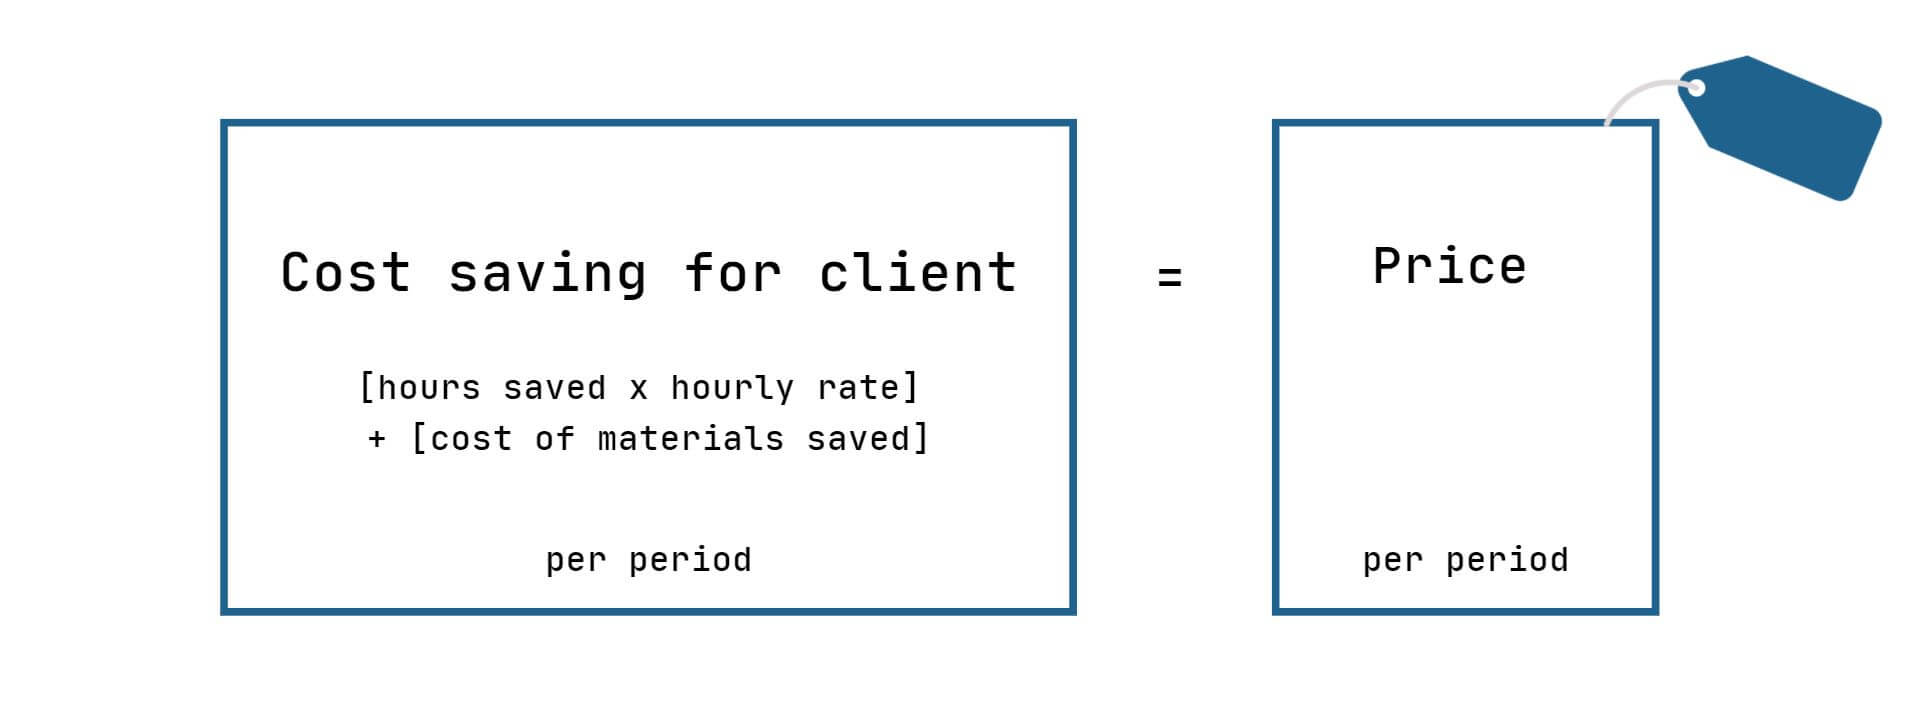 Cost saving for client = Price